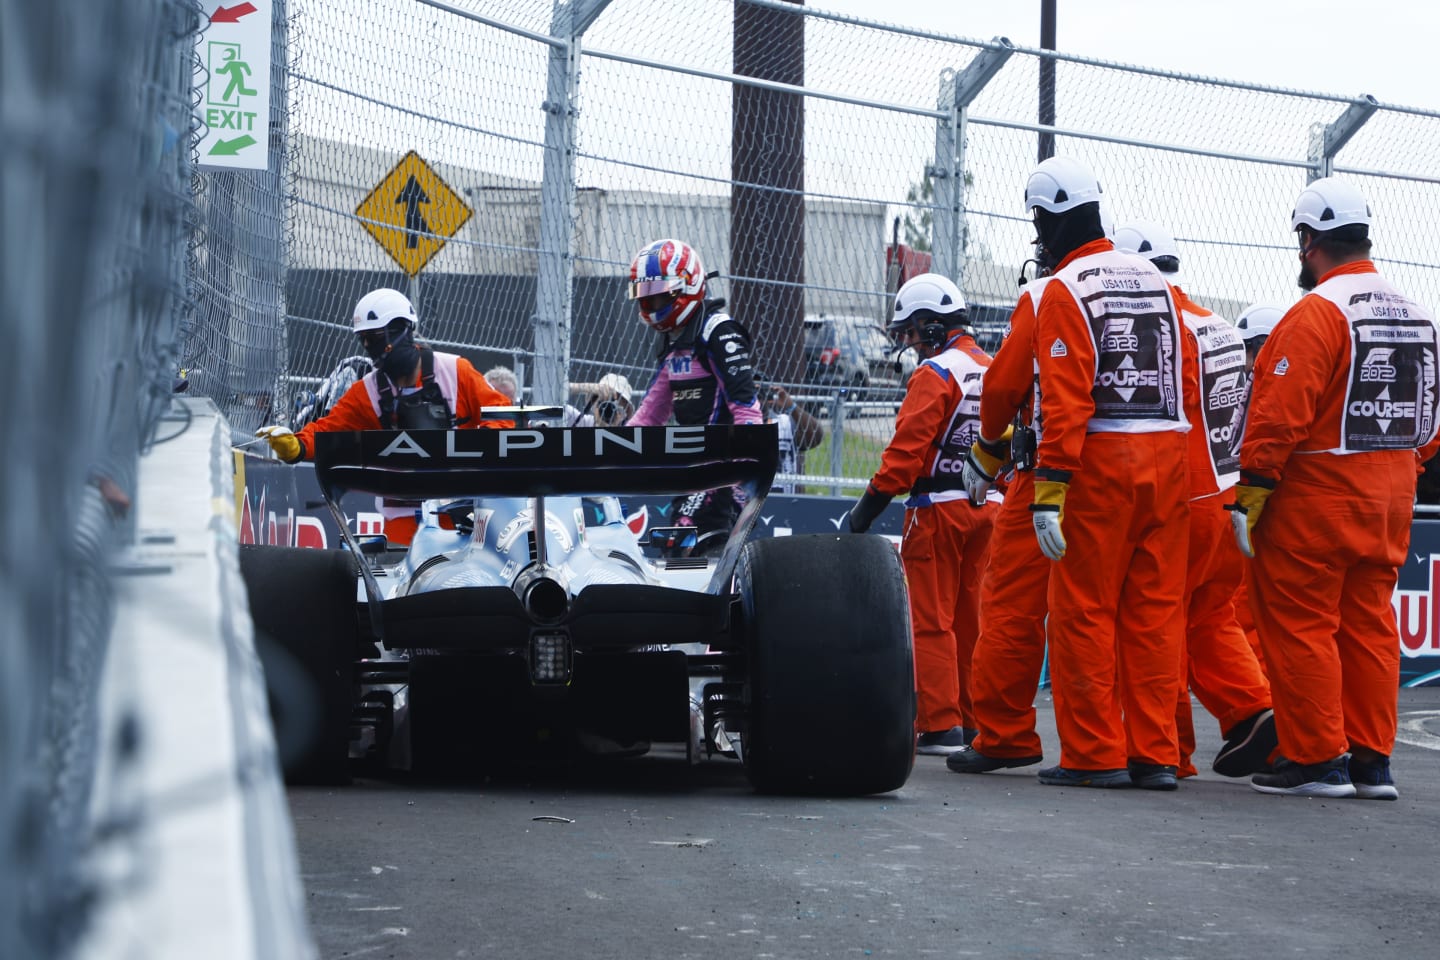 MIAMI, FLORIDA - MAY 07: Esteban Ocon of France and Alpine F1 walks from his car after a crash during final practice ahead of the F1 Grand Prix of Miami at the Miami International Autodrome on May 07, 2022 in Miami, Florida. (Photo by Jared C. Tilton/Getty Images)